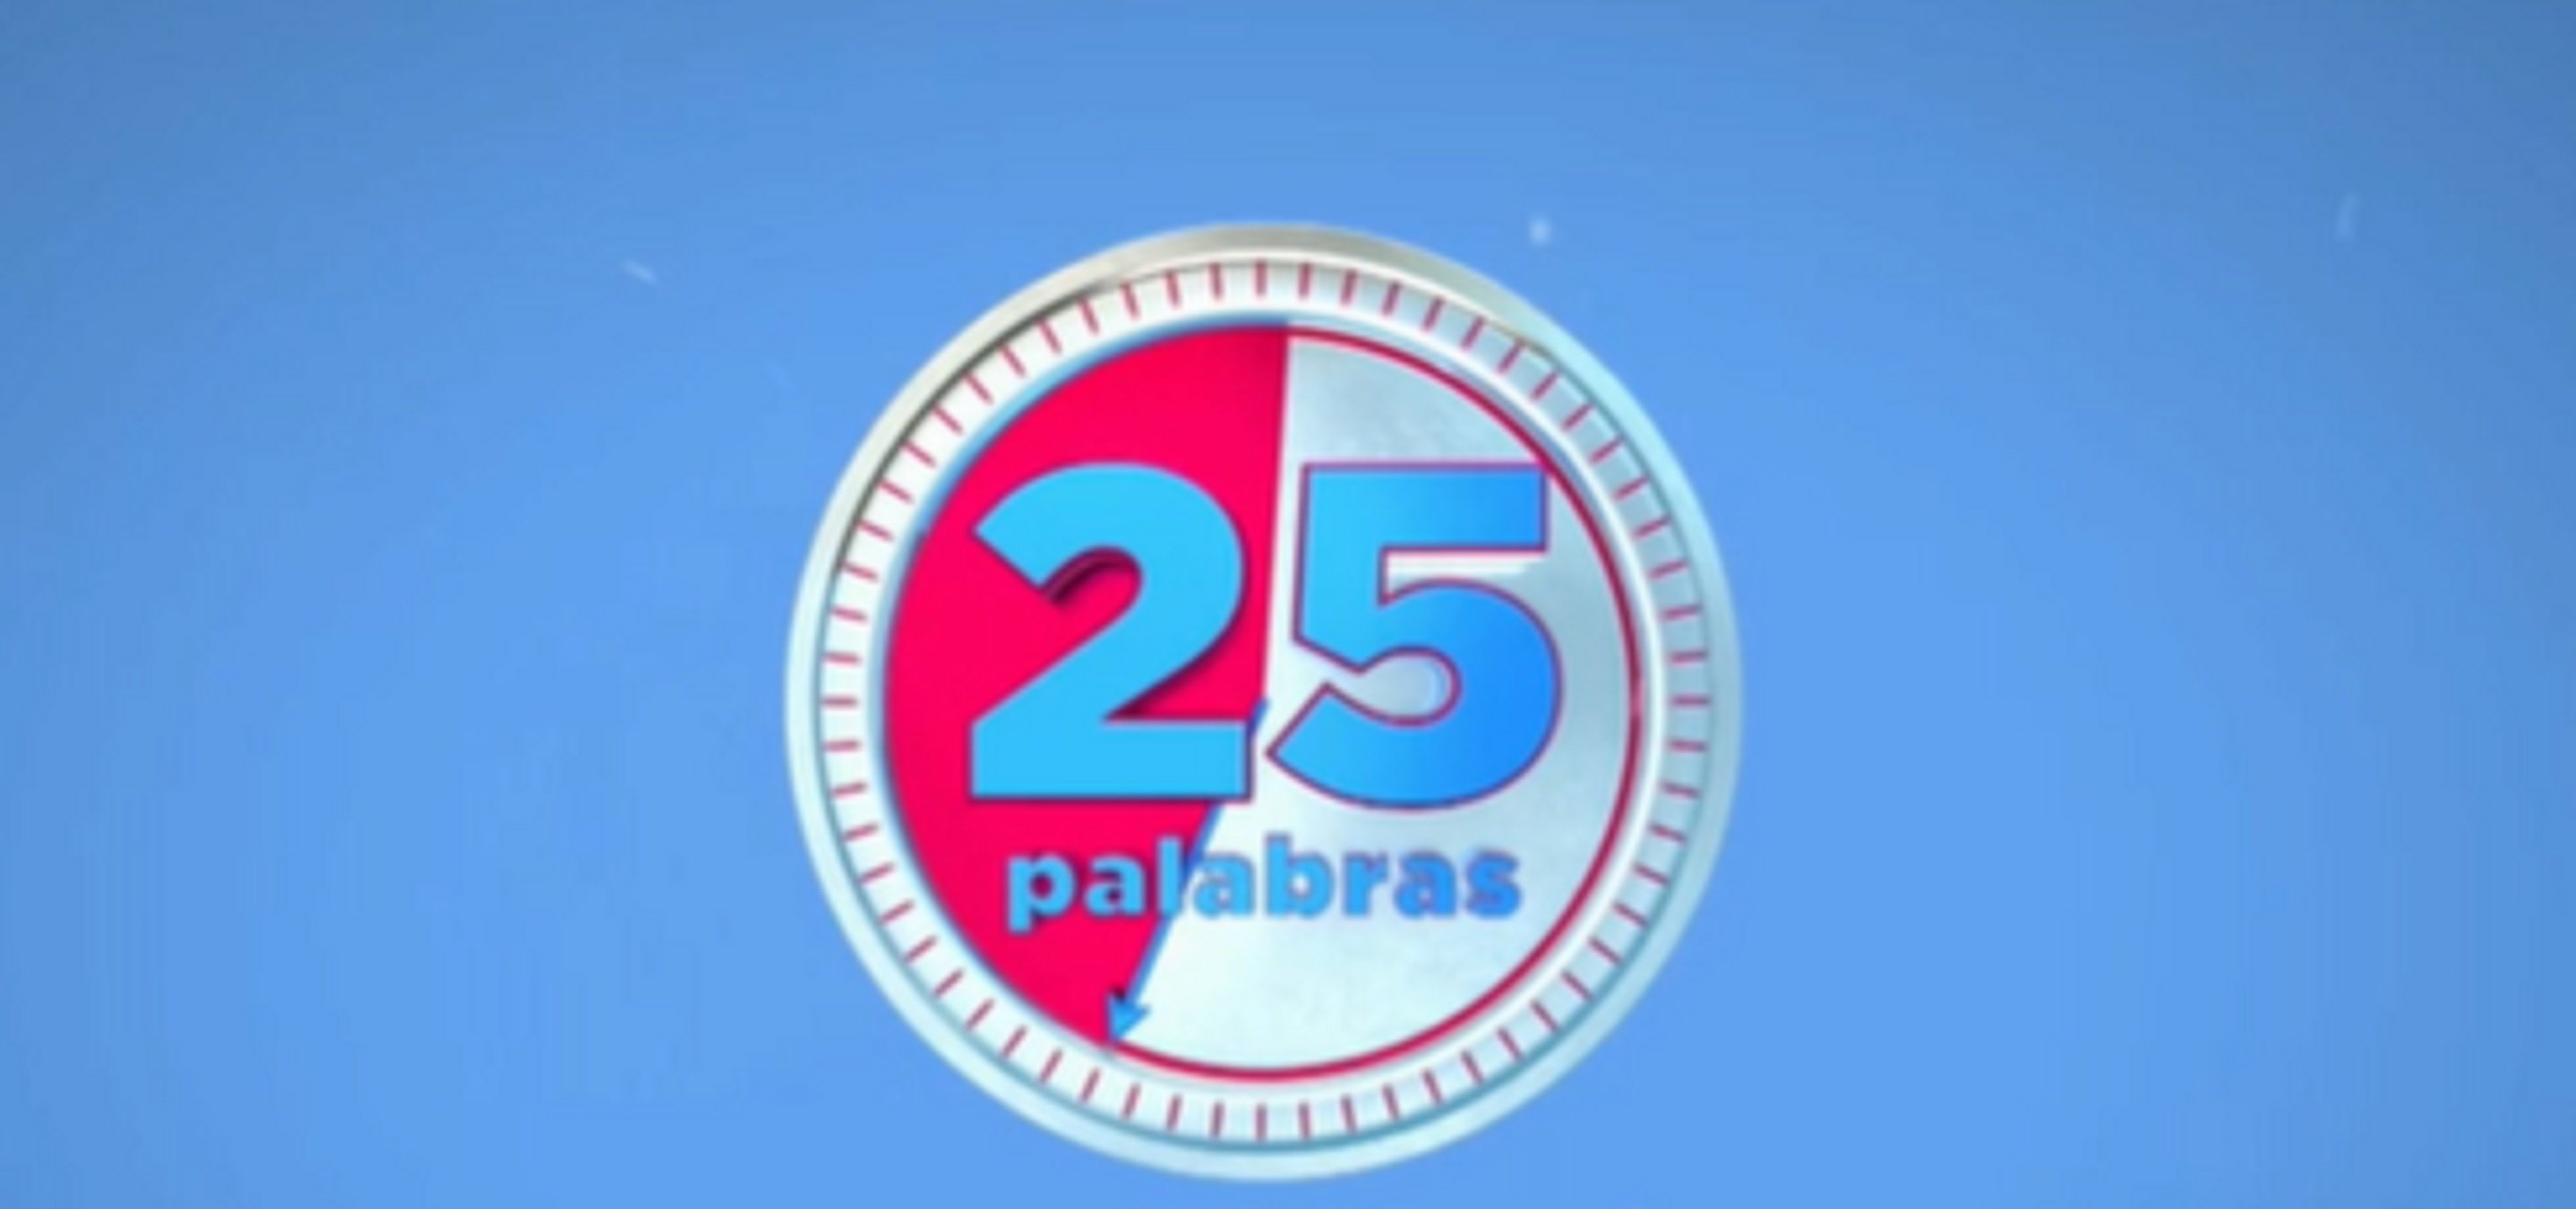 25 palabras   T5